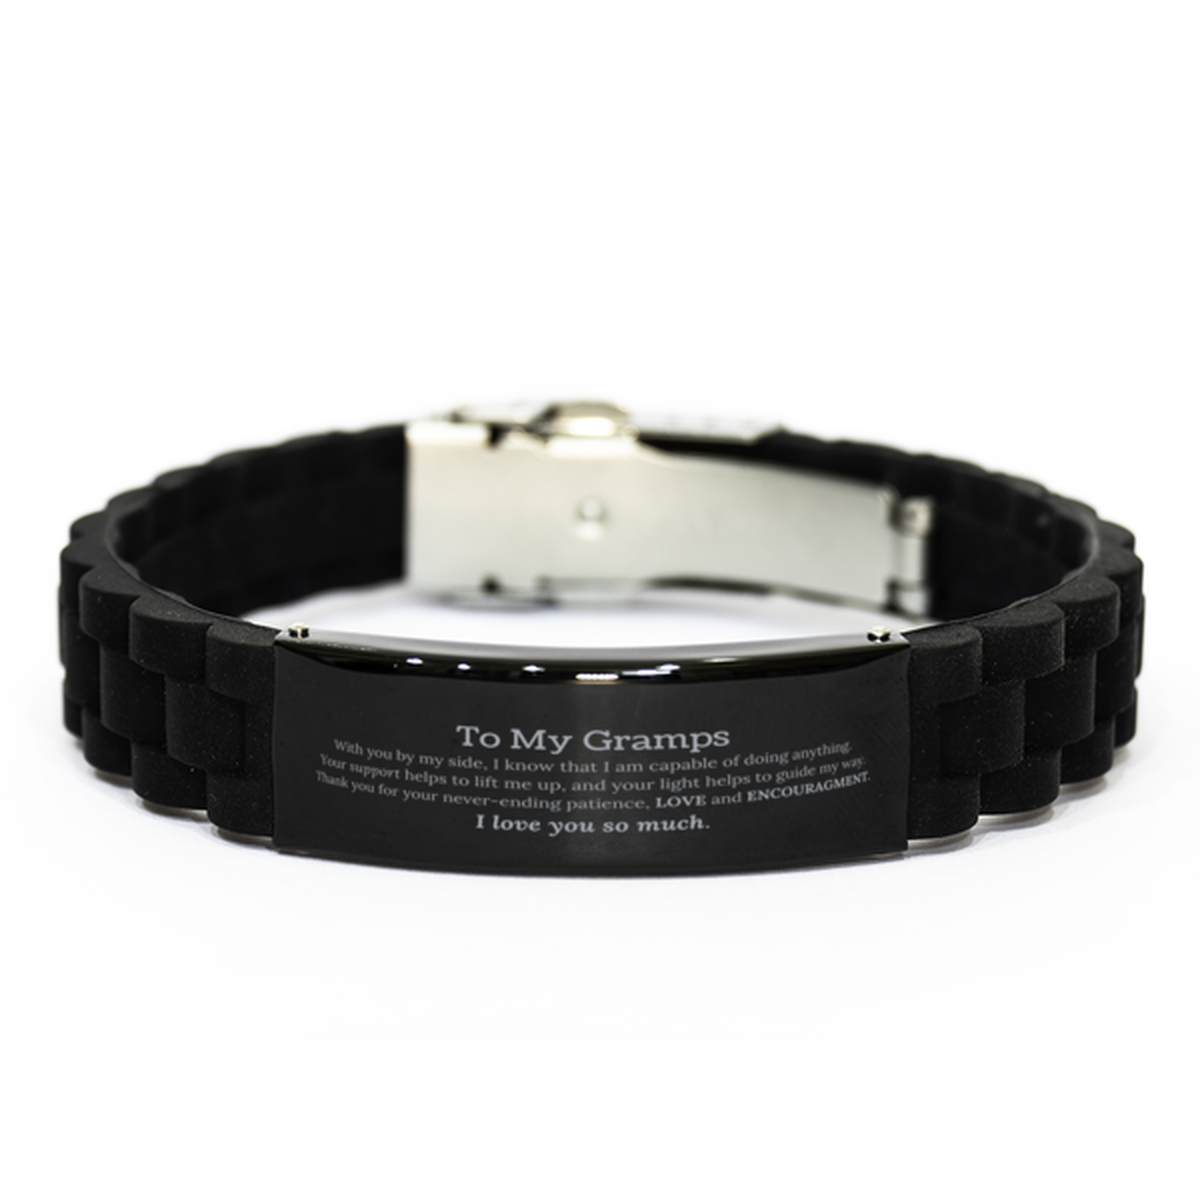 Appreciation Gramps Black Glidelock Clasp Bracelet Gifts, To My Gramps Birthday Christmas Wedding Keepsake Gifts for Gramps With you by my side, I know that I am capable of doing anything. I love you so much